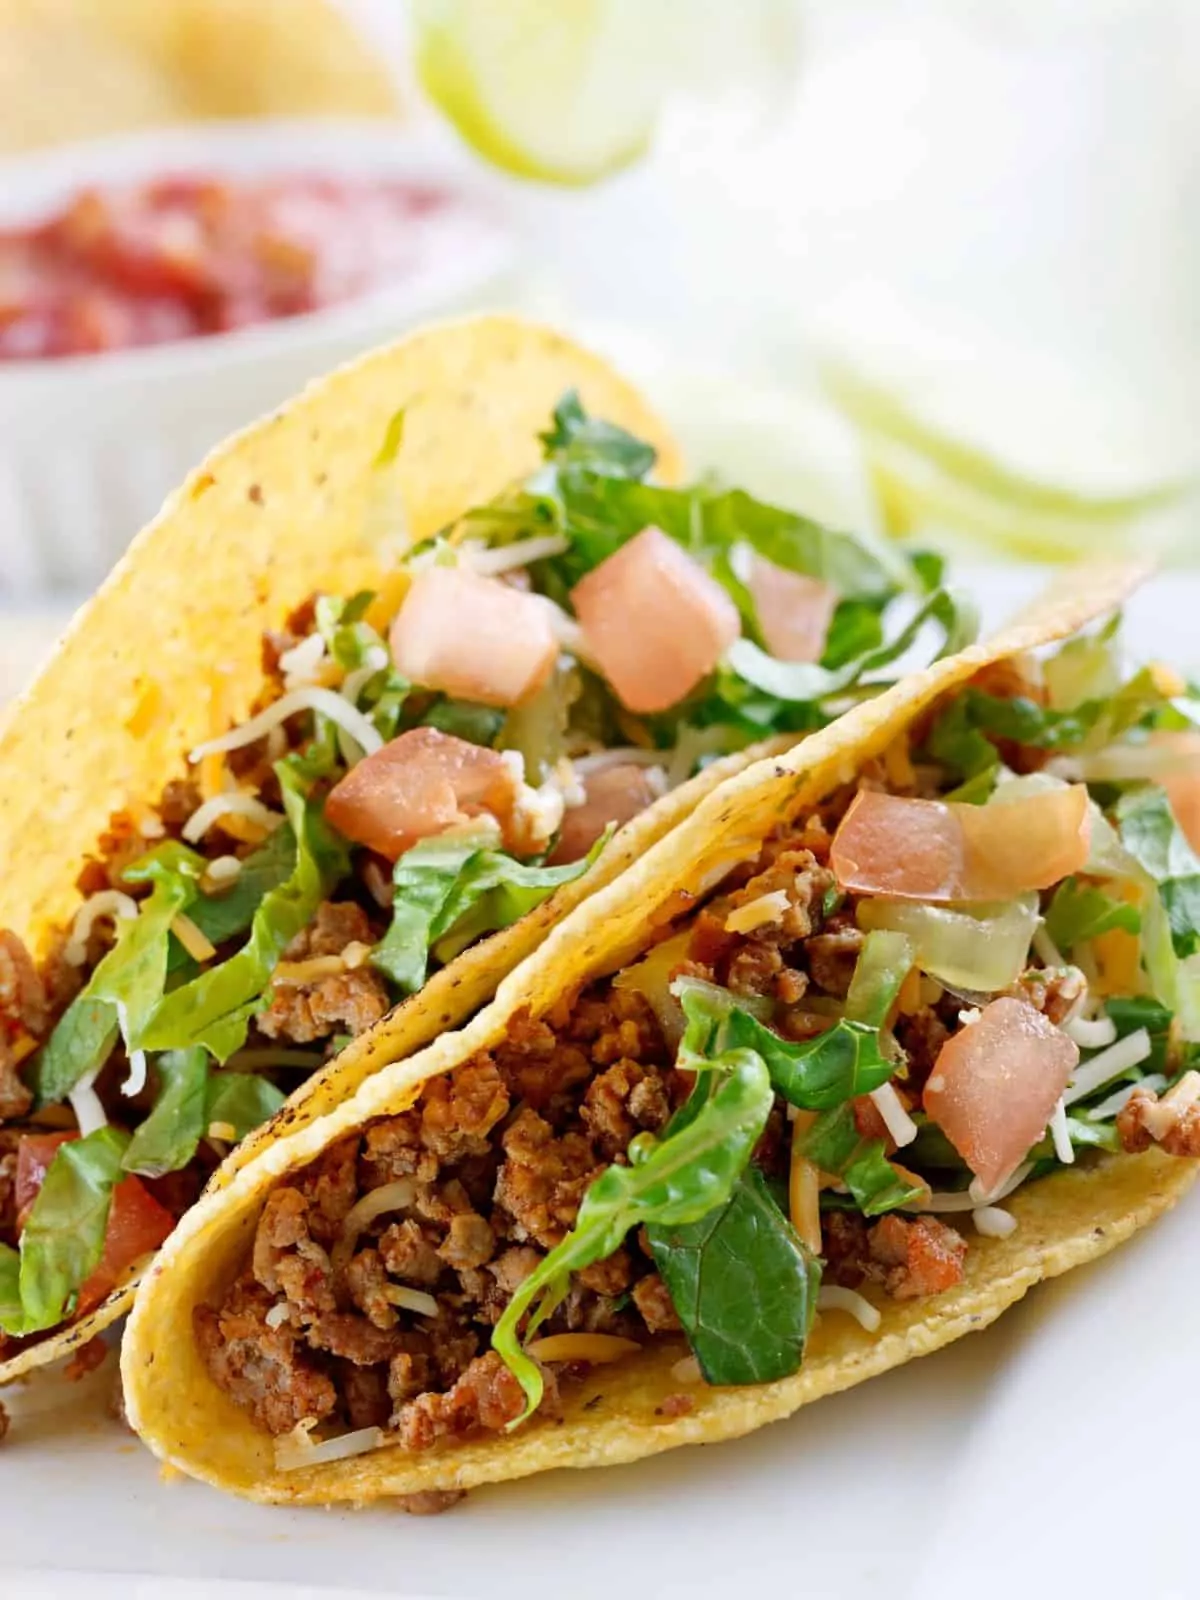 tacos with seasoned beef, lettuce, tomatoes and cheese.